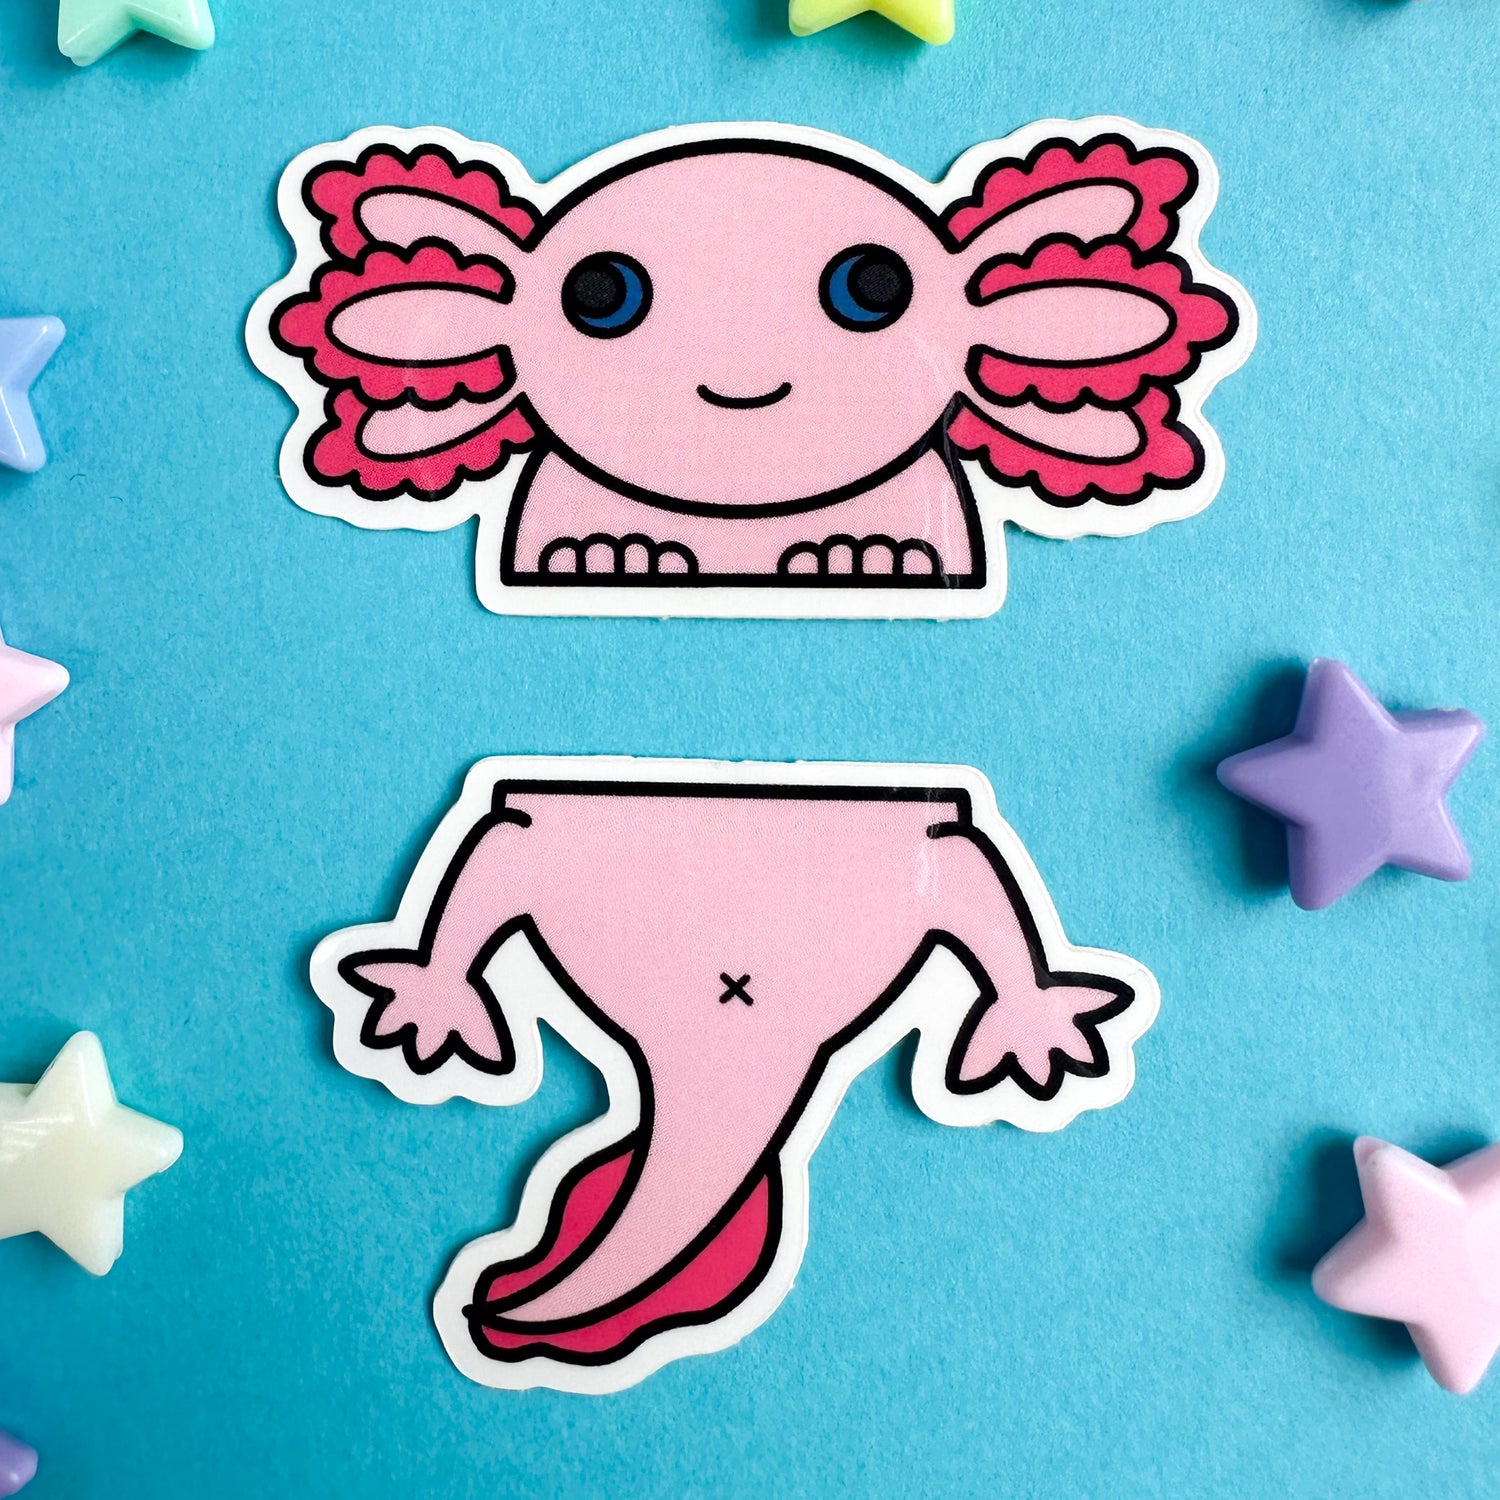 A cute Axolotl sticker set, one is the top half and one is the bottom. The stickers are on a blue paper background with star beads around them. 